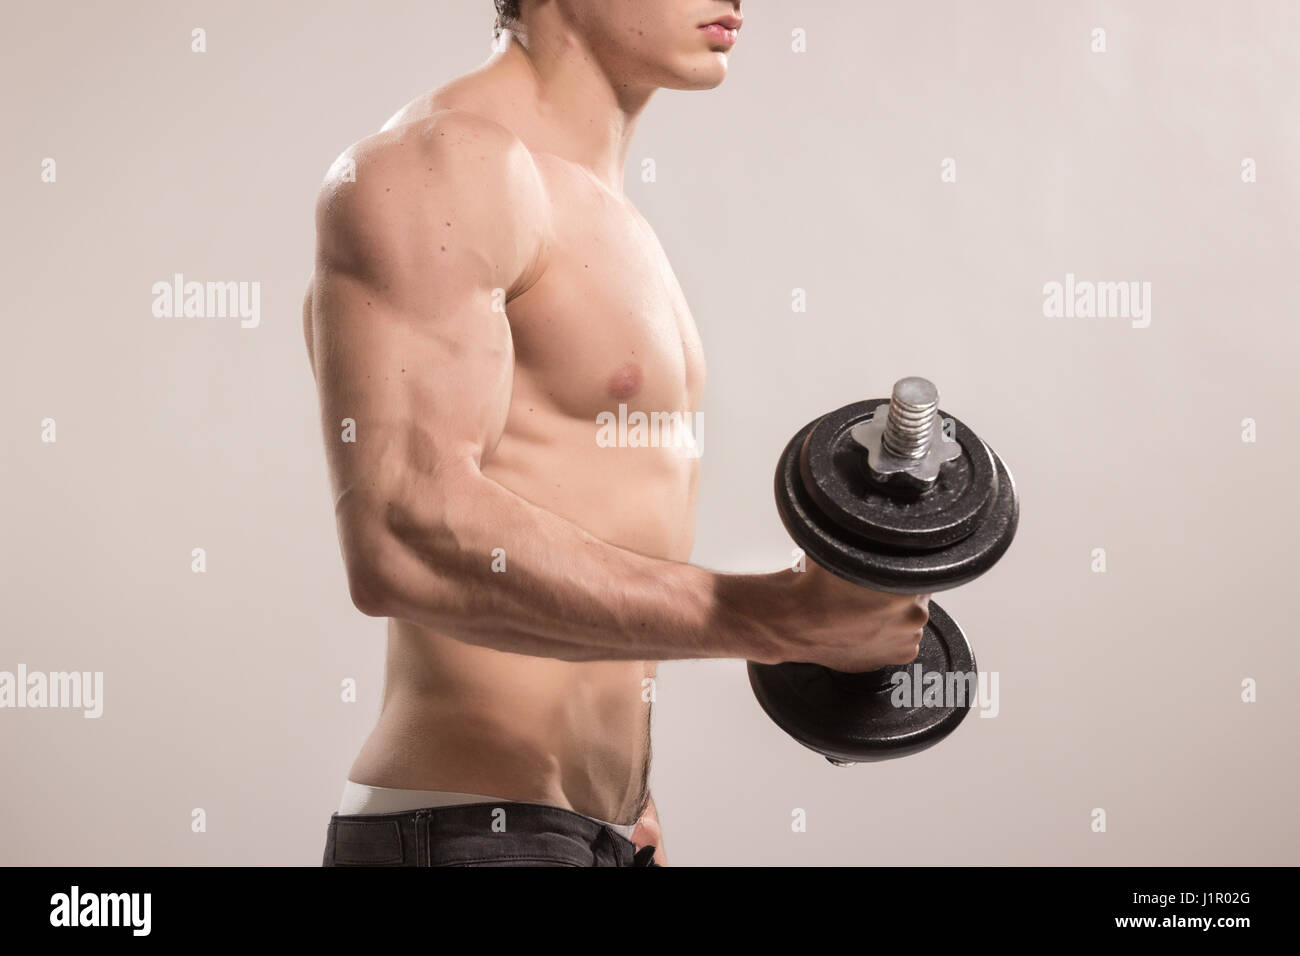 Young Adult Man Strong Muscular Arm Bodybuilder Holding Dumbbell Images, Photos, Reviews